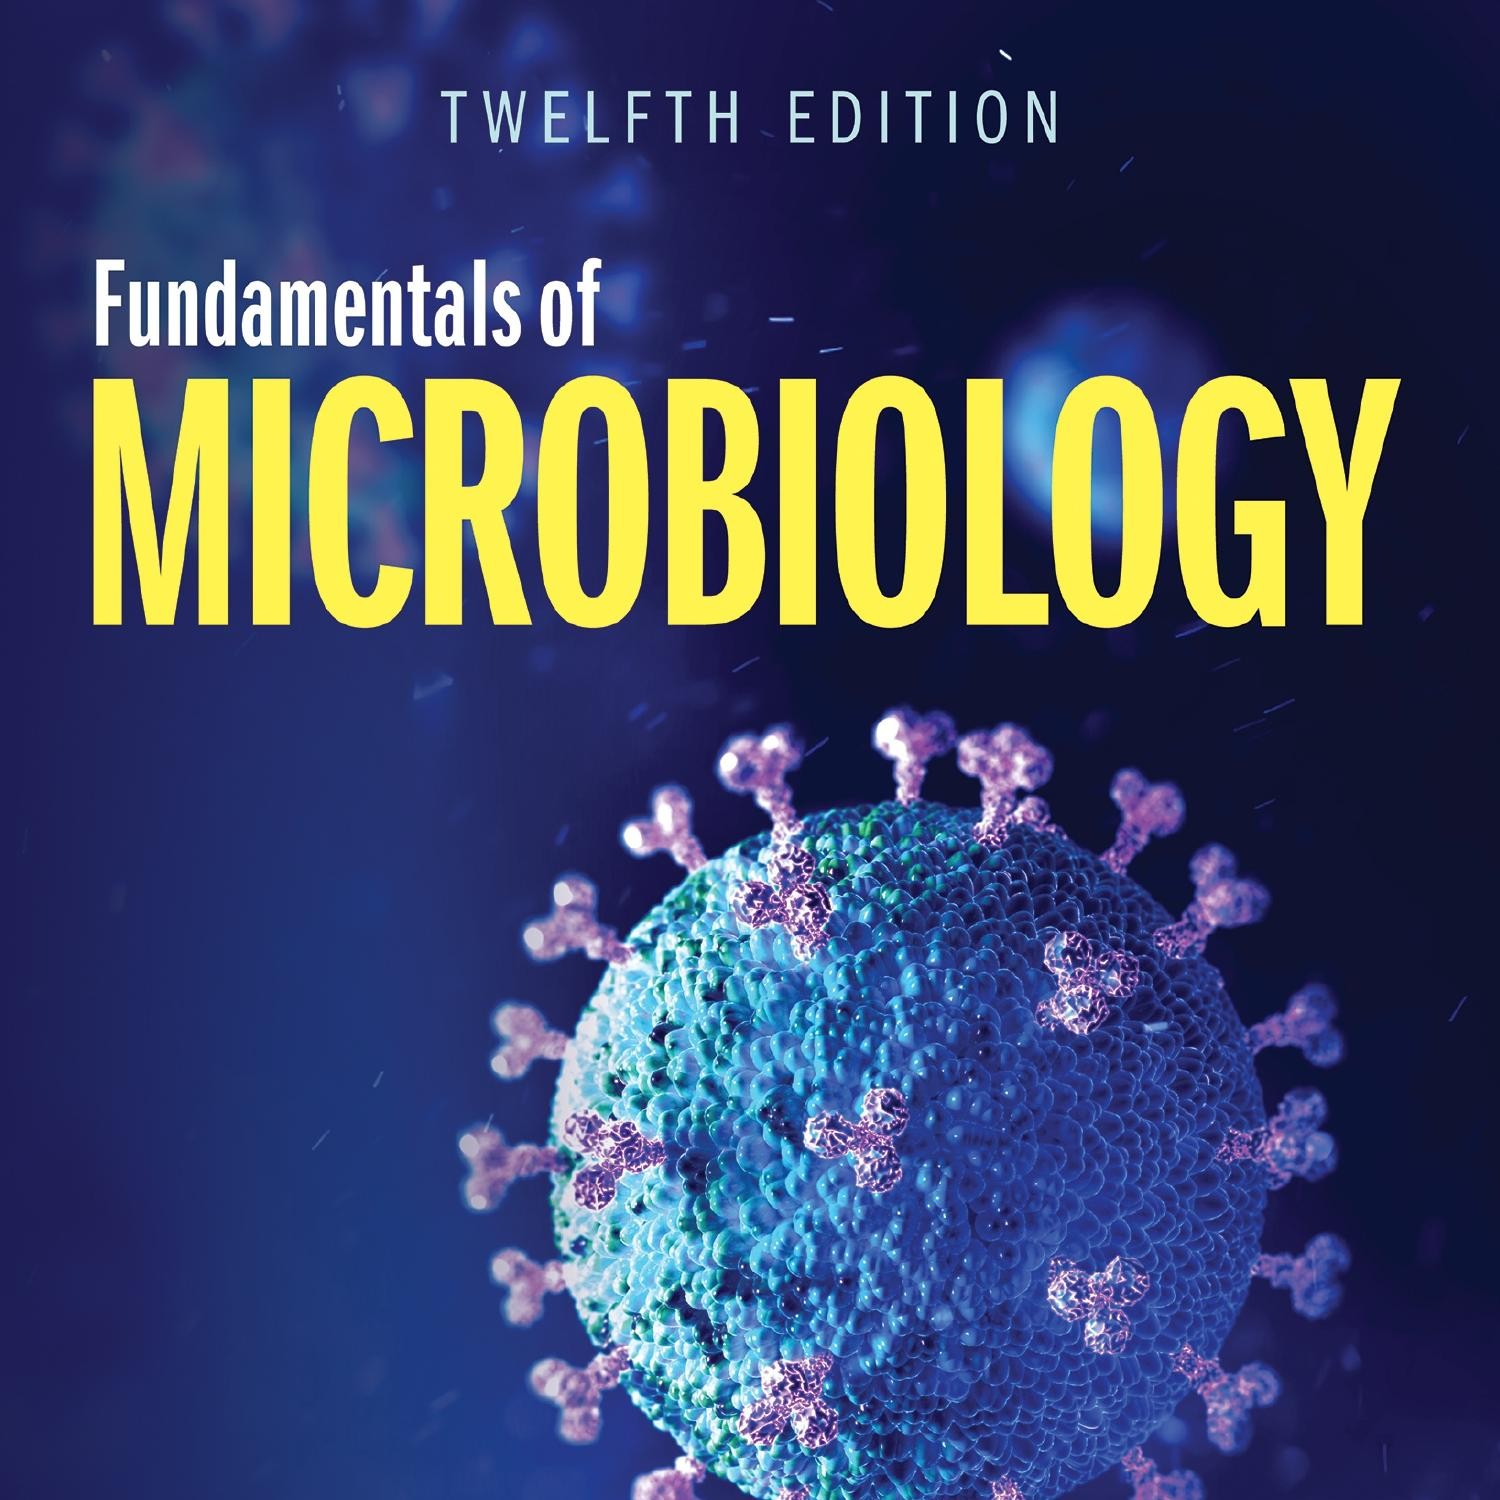 microbiology research articles 2022